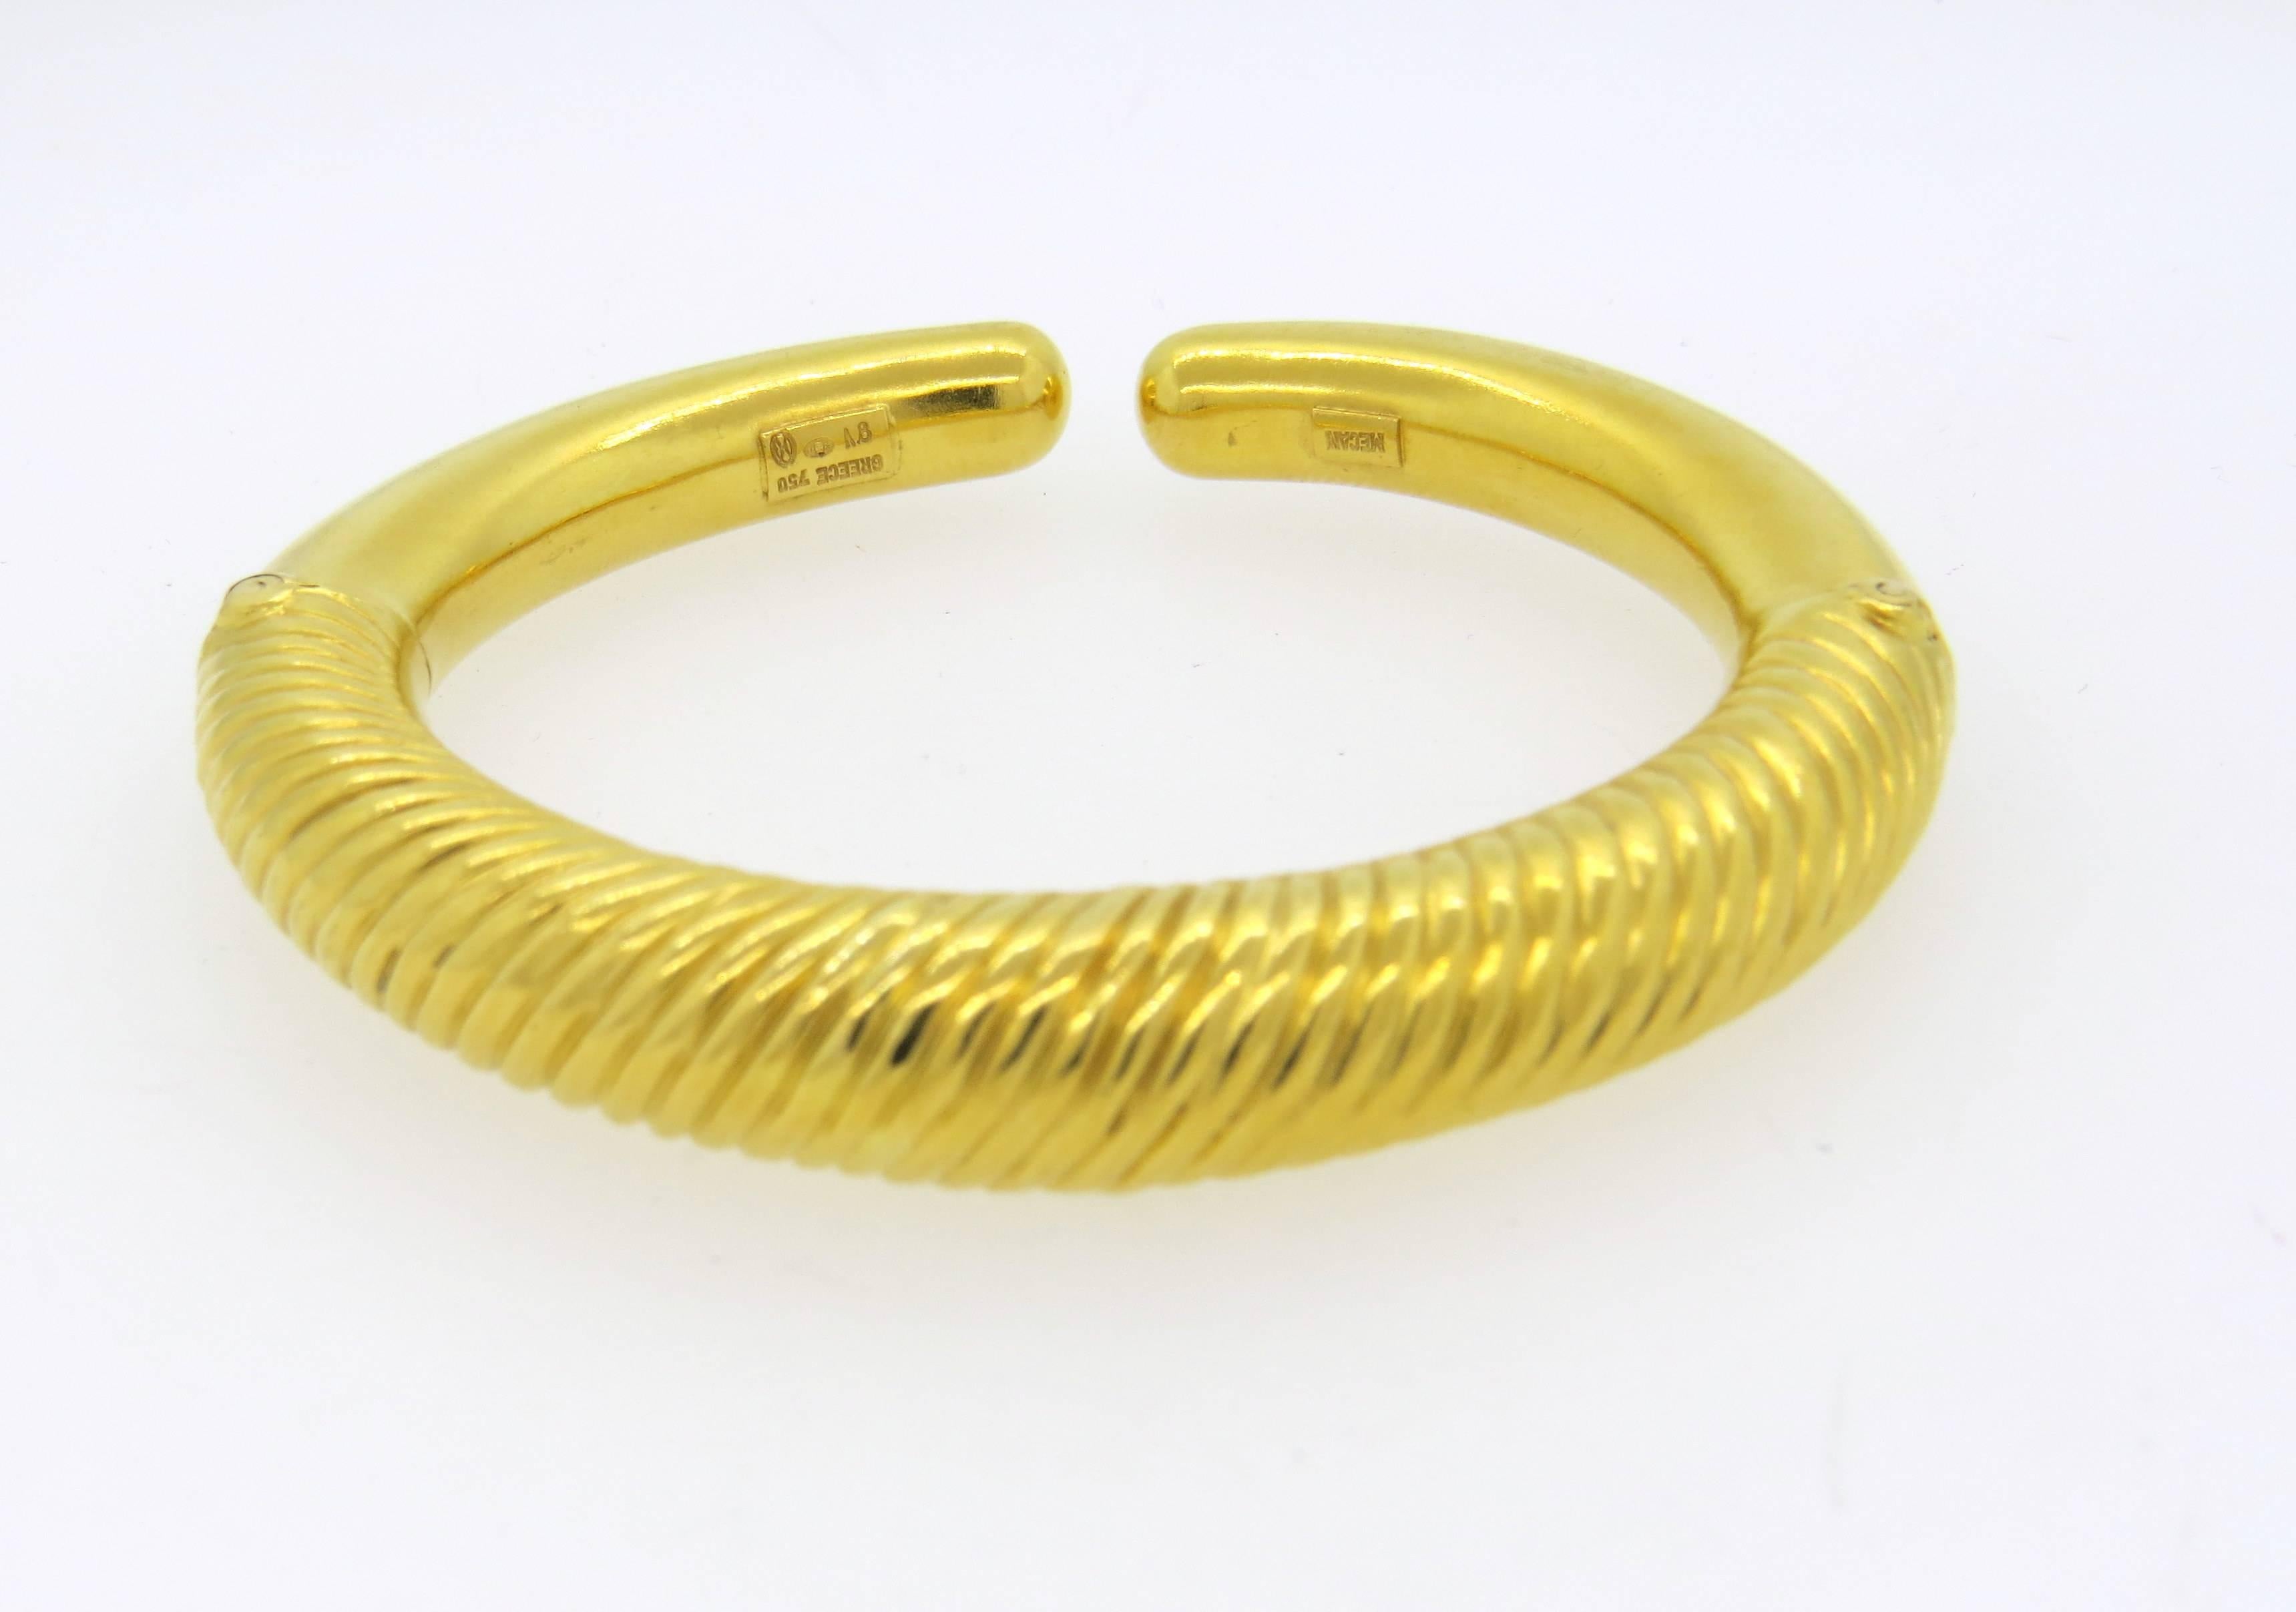 18k yellow gold cuff bracelet, crafted by Ilias Lalaounis. Bracelet will comfortably fit up to 7